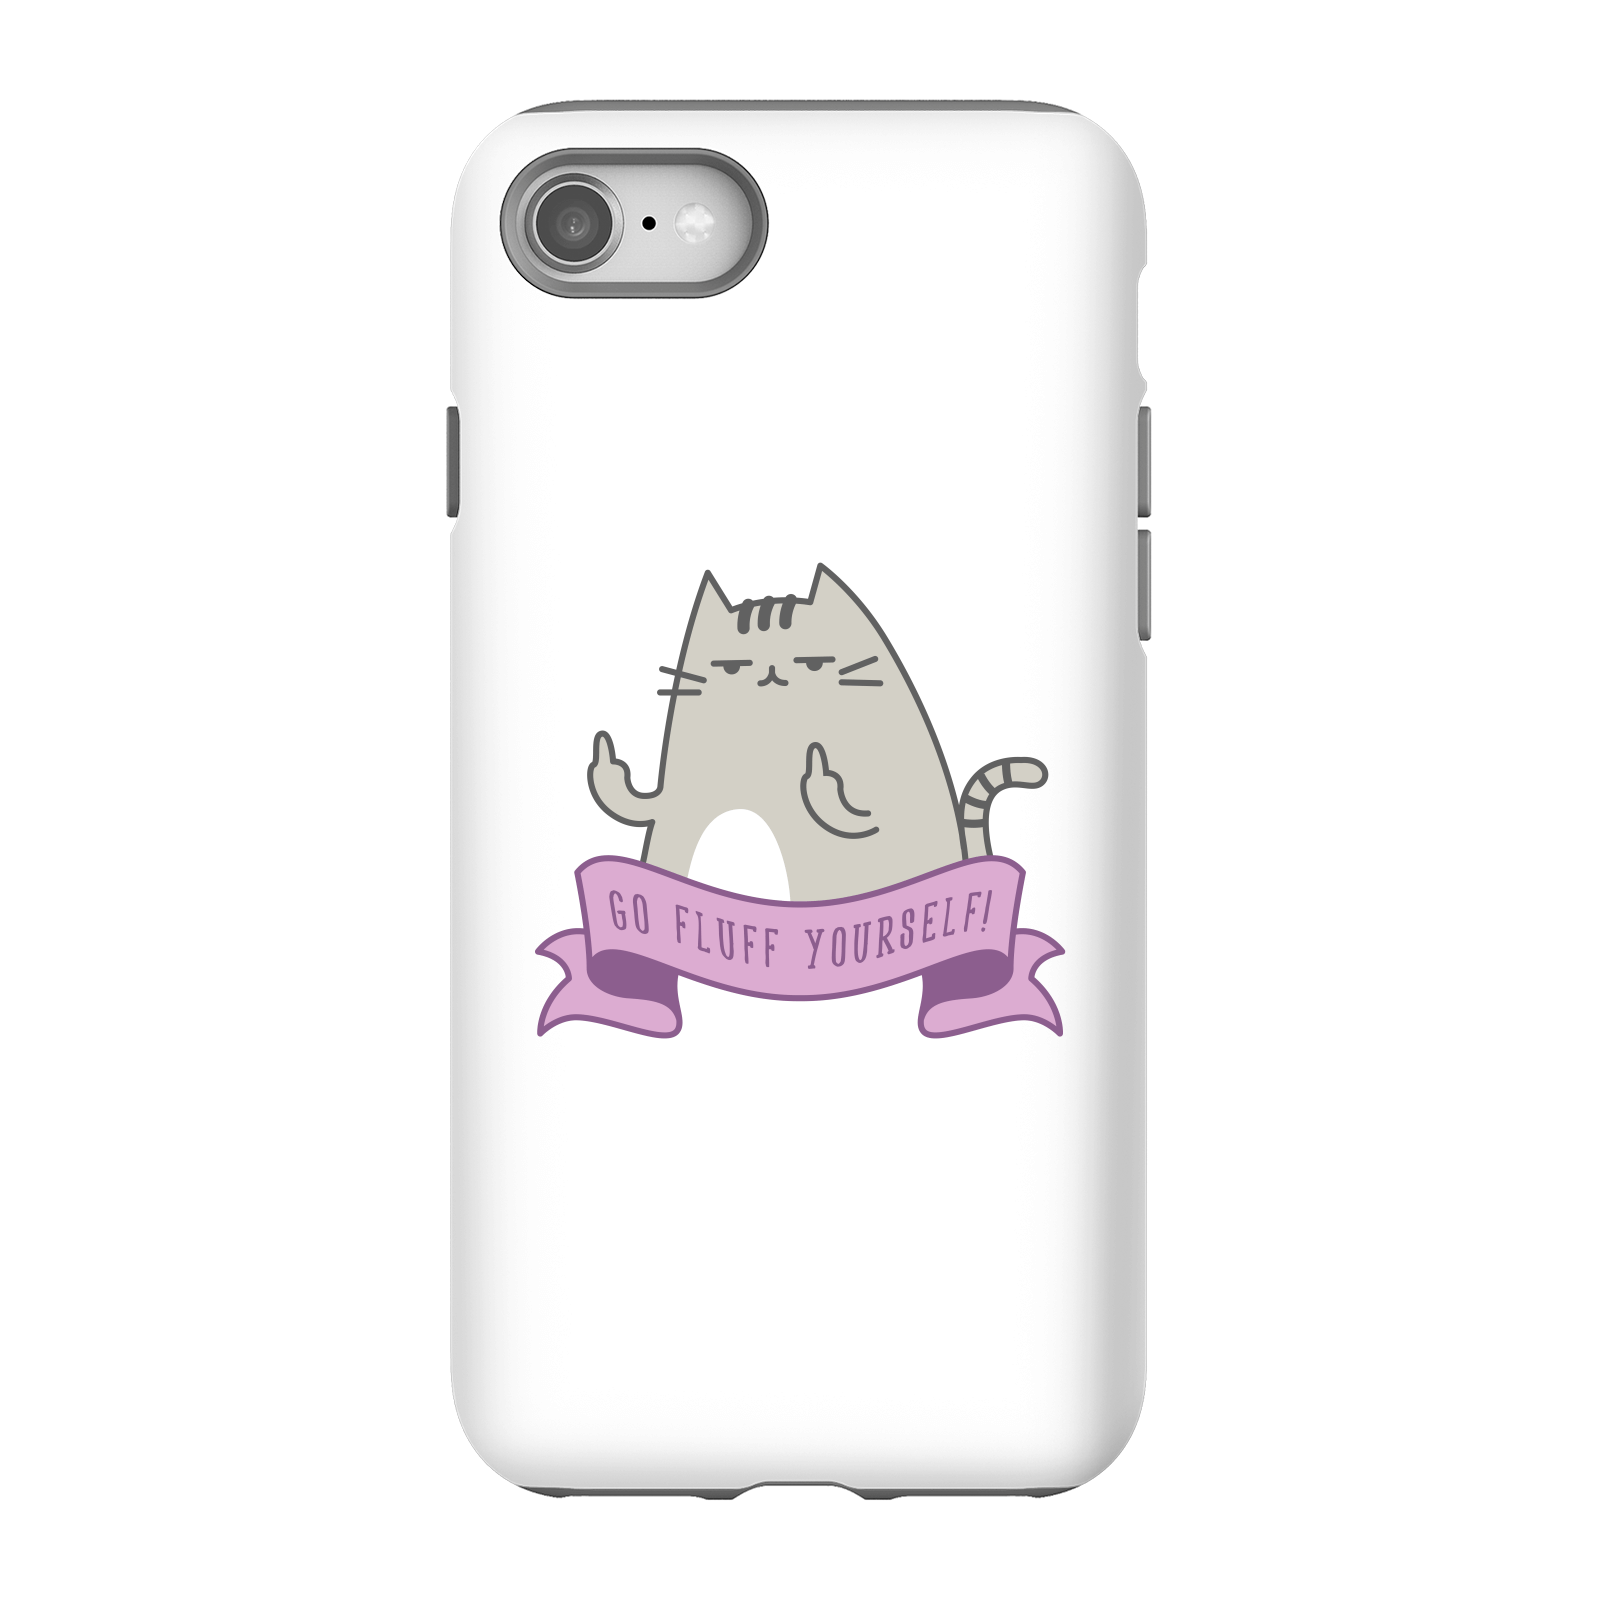 Go Fluff Yourself! Phone Case for iPhone and Android - iPhone 8 - Tough Case - Matte